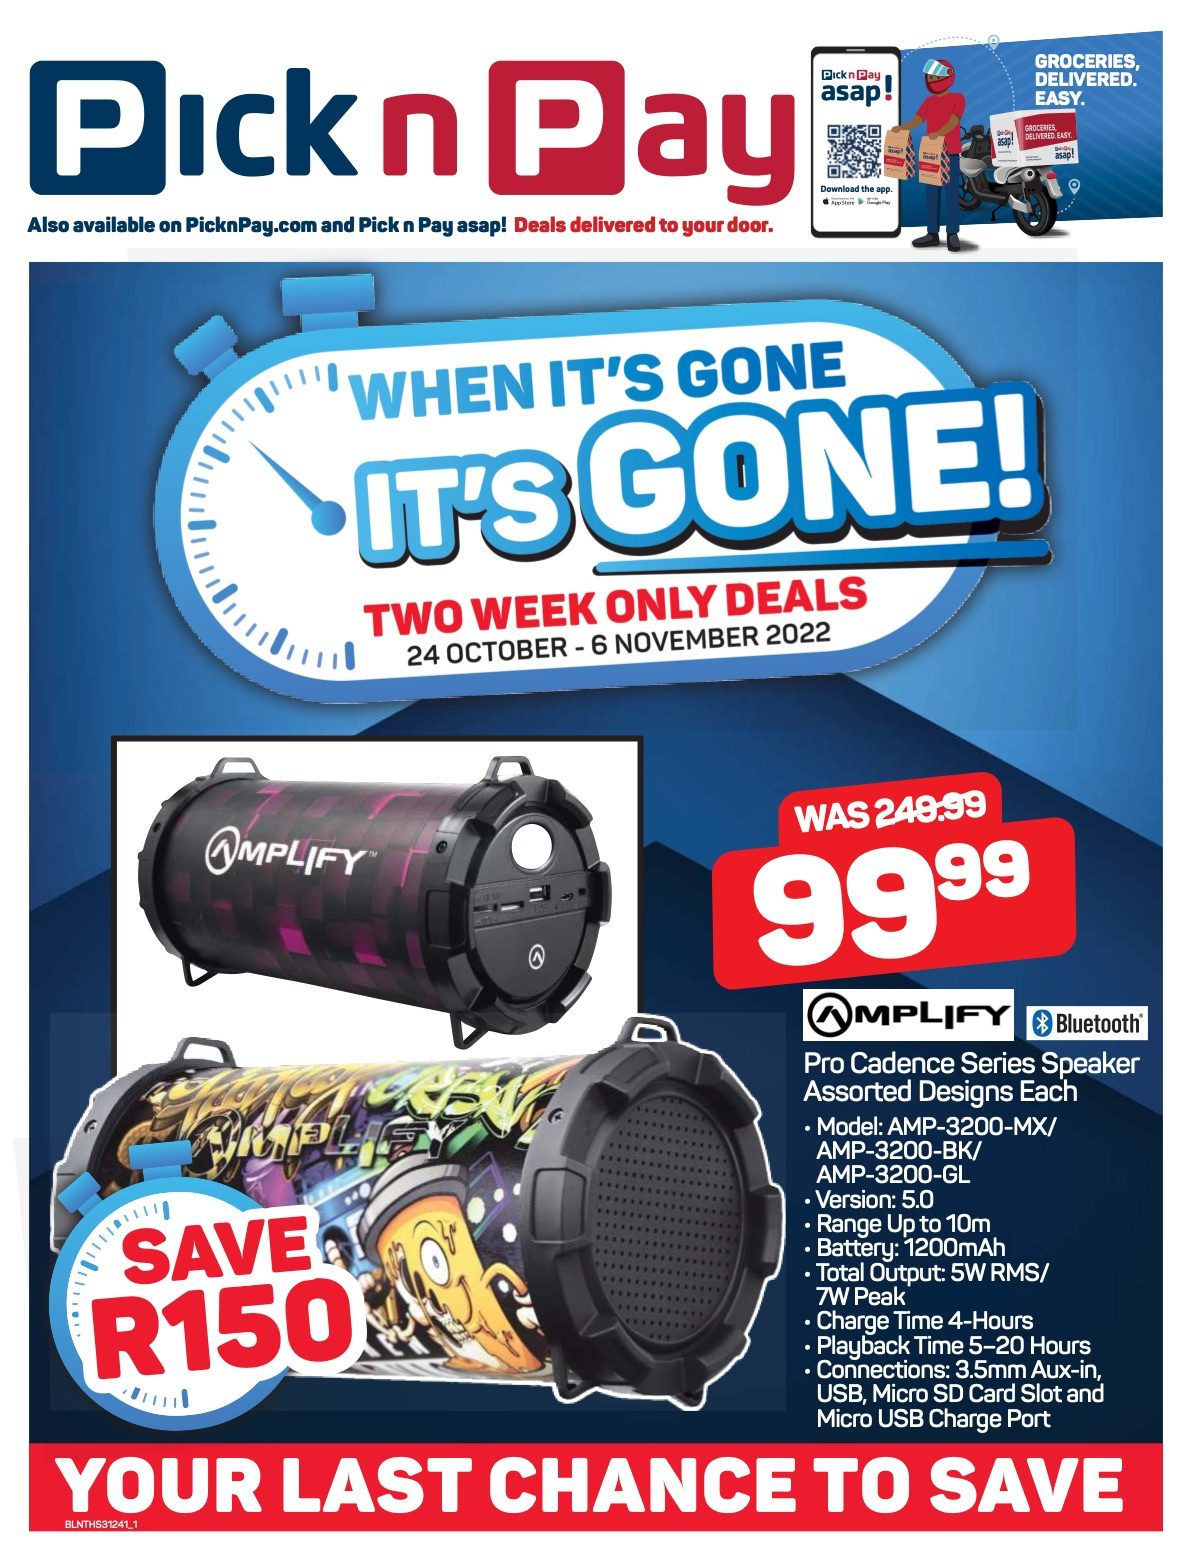 Pick n Pay Specials Two Week Deals Oct 2022